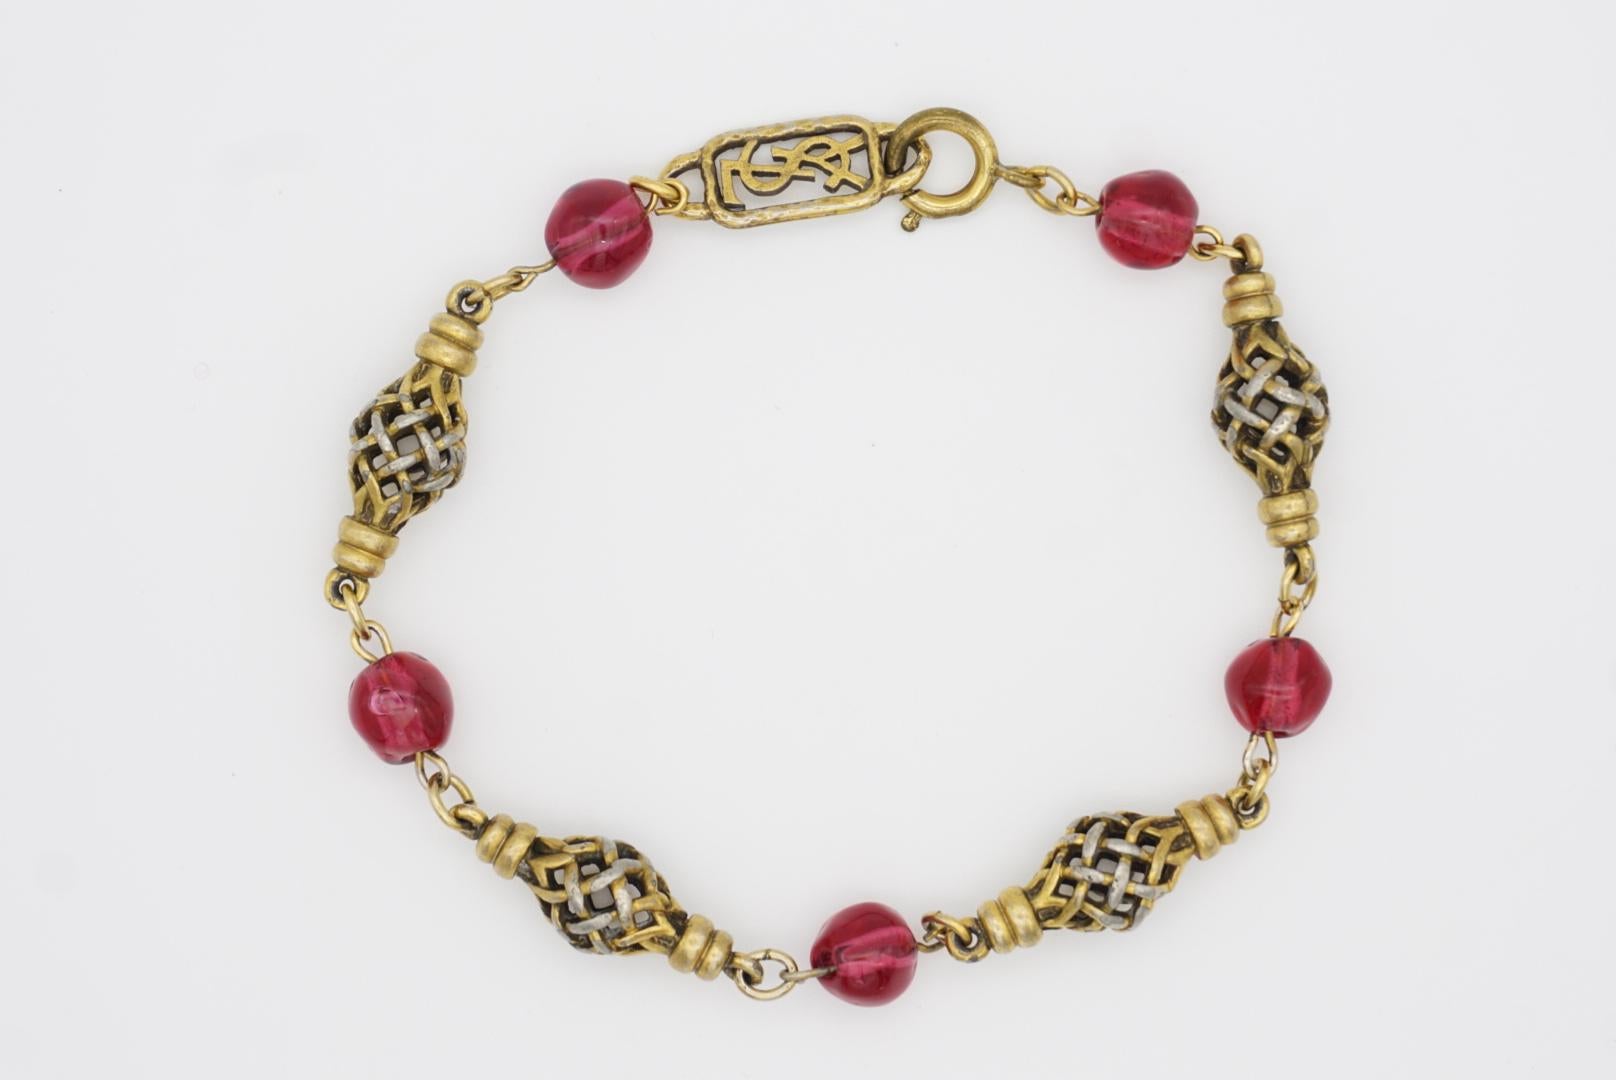 Yves Saint Laurent YSL Arty Beaded Clear Ruby Ball Openwork Interlink Bracelet, Gold Tone.

Good condition. Light scratches and colour loss. Very good to wear. 100% genuine. 

Size: 22 * 1.0 cm.

Weight: 14 g. 


_ _ _

Great for everyday wear. Come